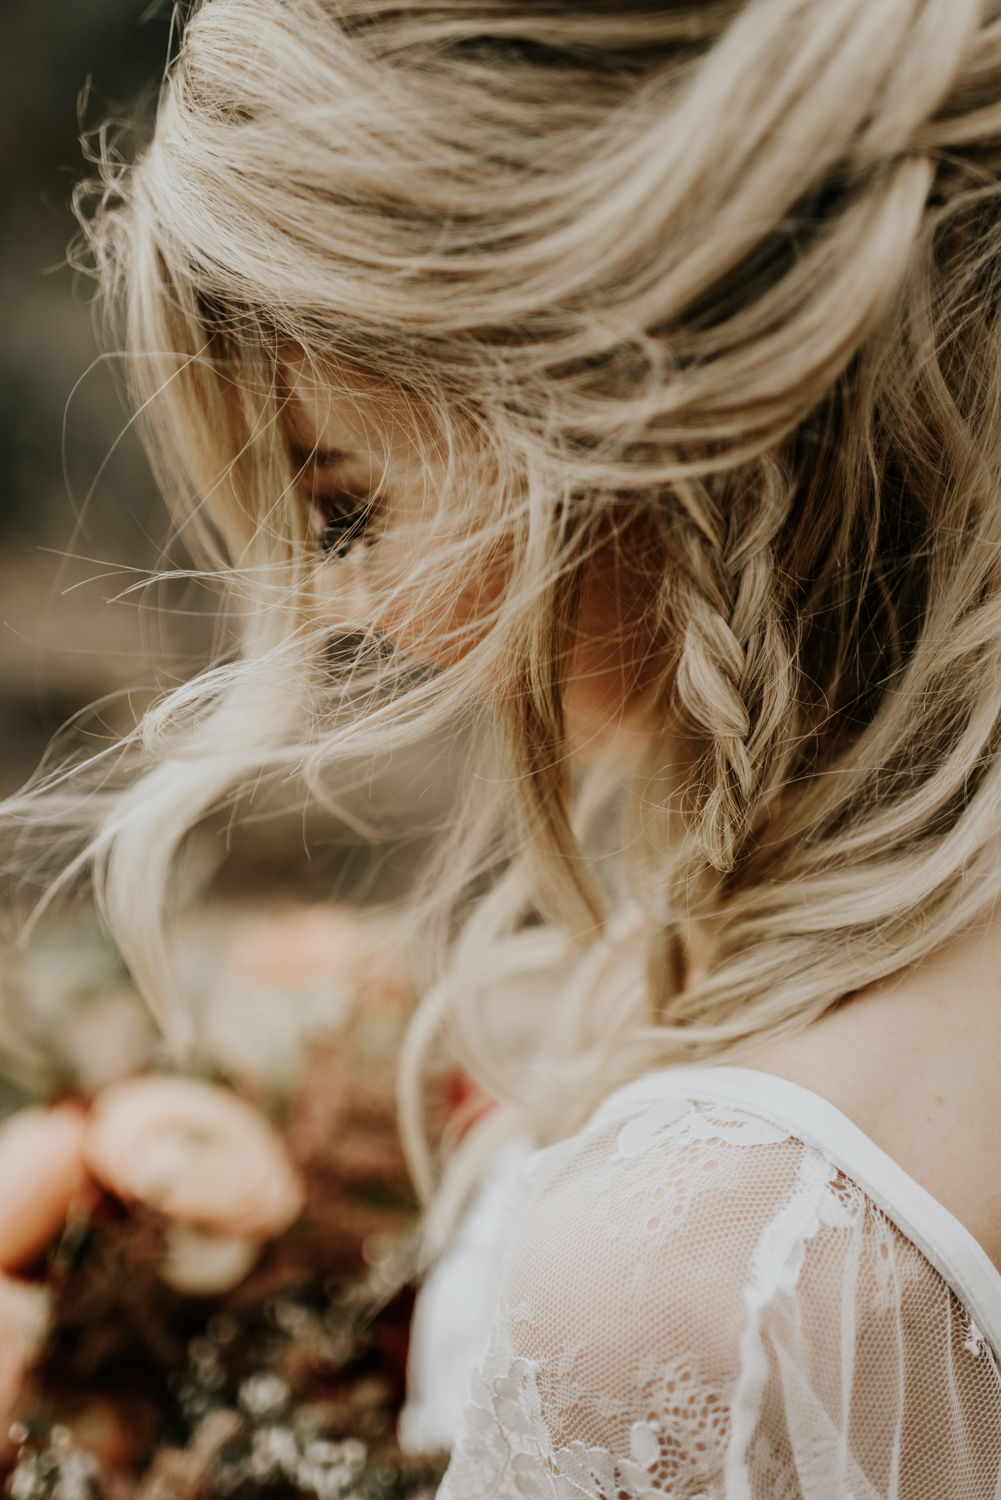 Elopement Wedding Photographer for adventurous couples. | Based in ...